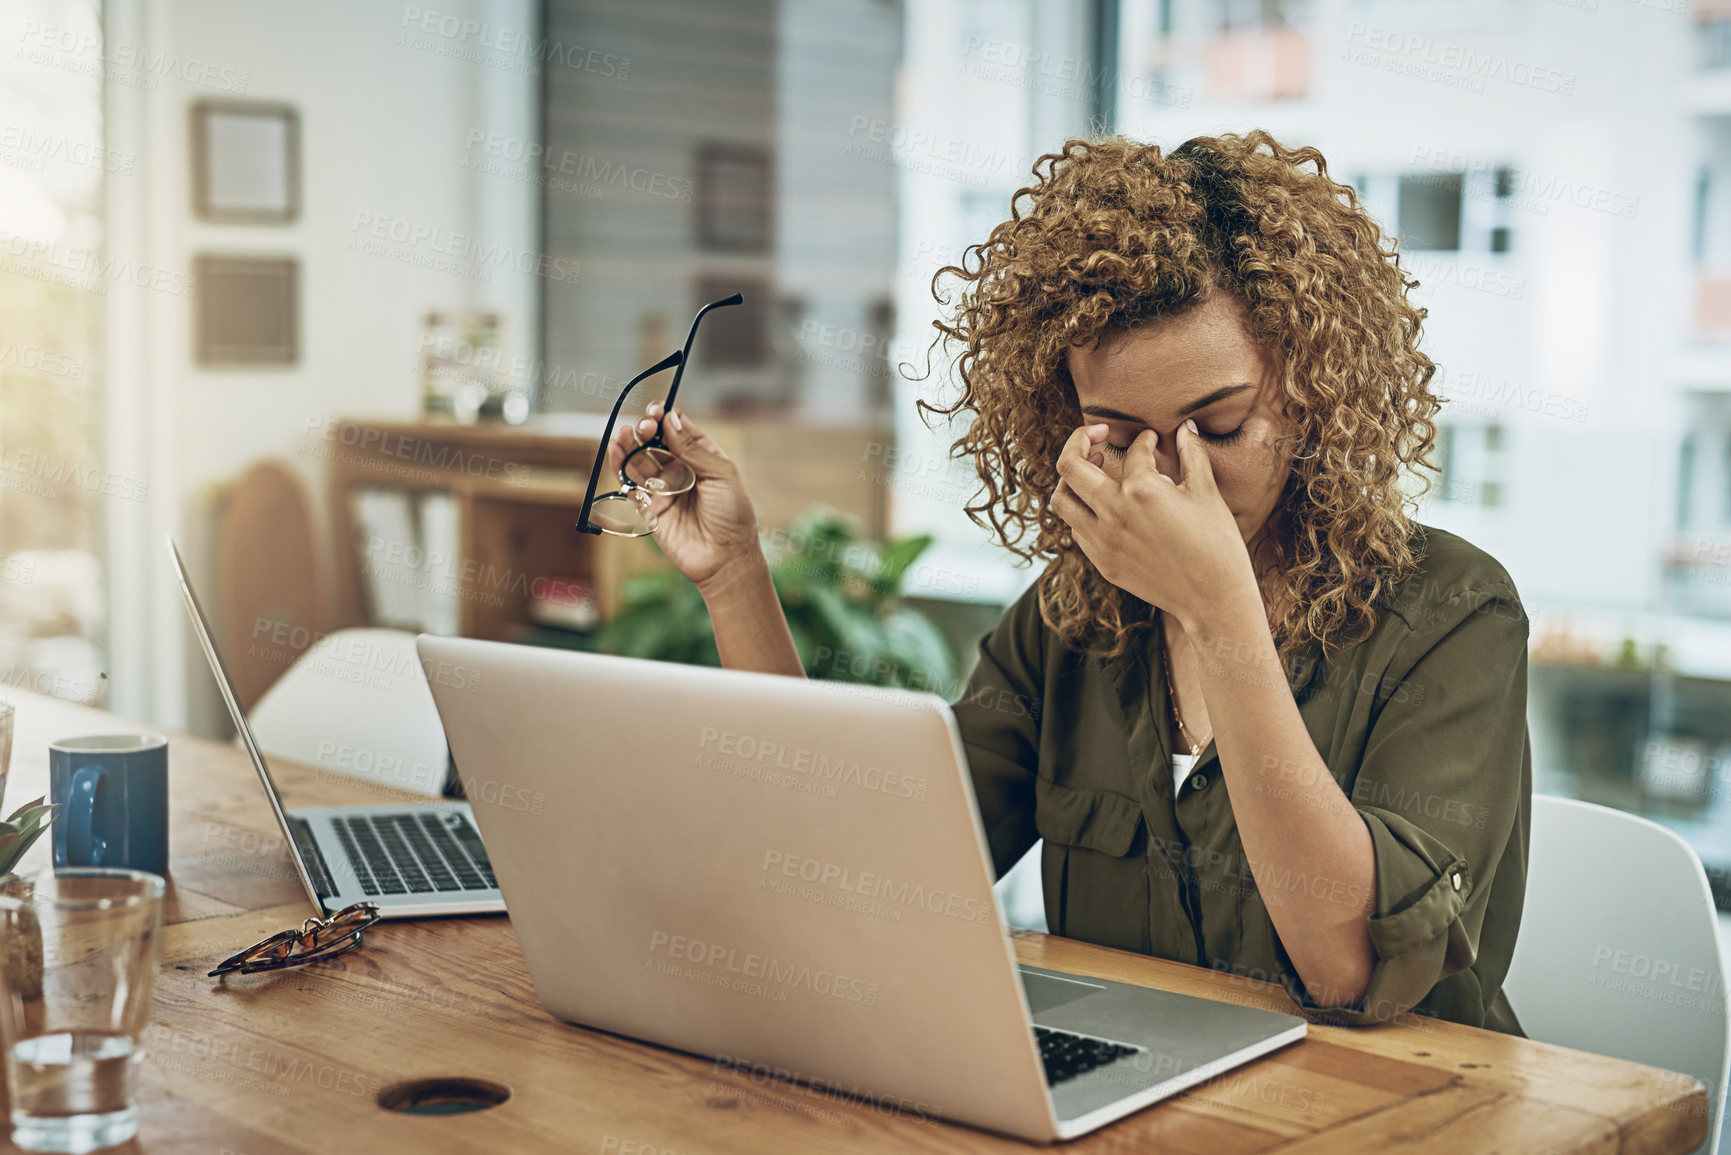 Buy stock photo Shot of a young woman suffering from stress while using a computer at her work desk